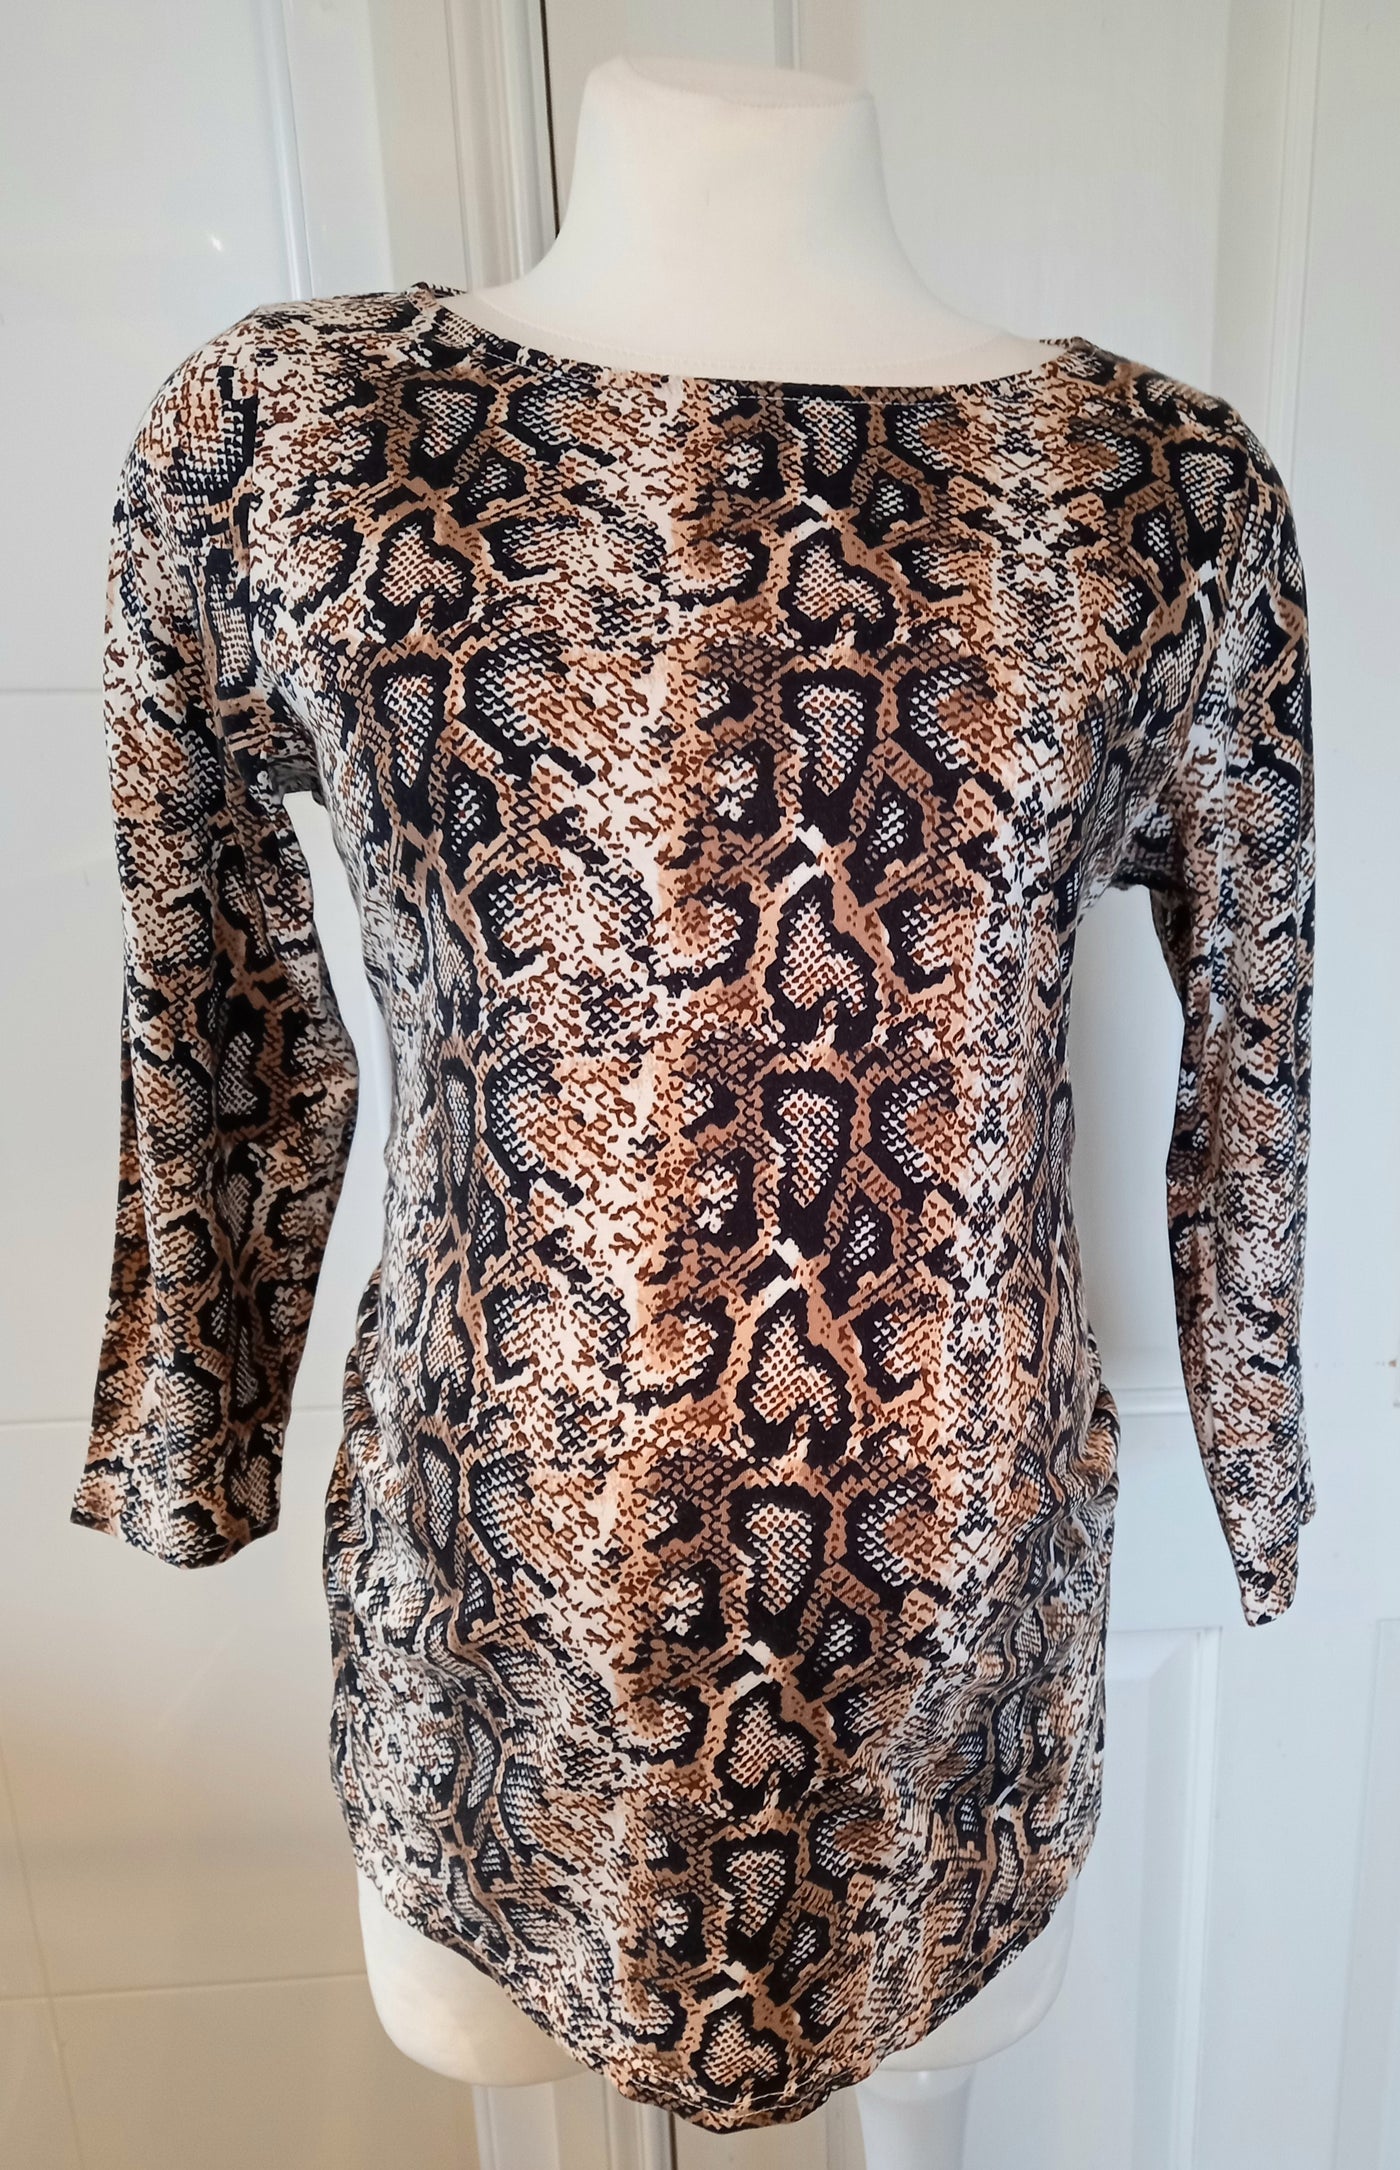 Dorothy Perkins Snakeskin Stretch Maternity Top with 3/4 Sleeves - Size 12